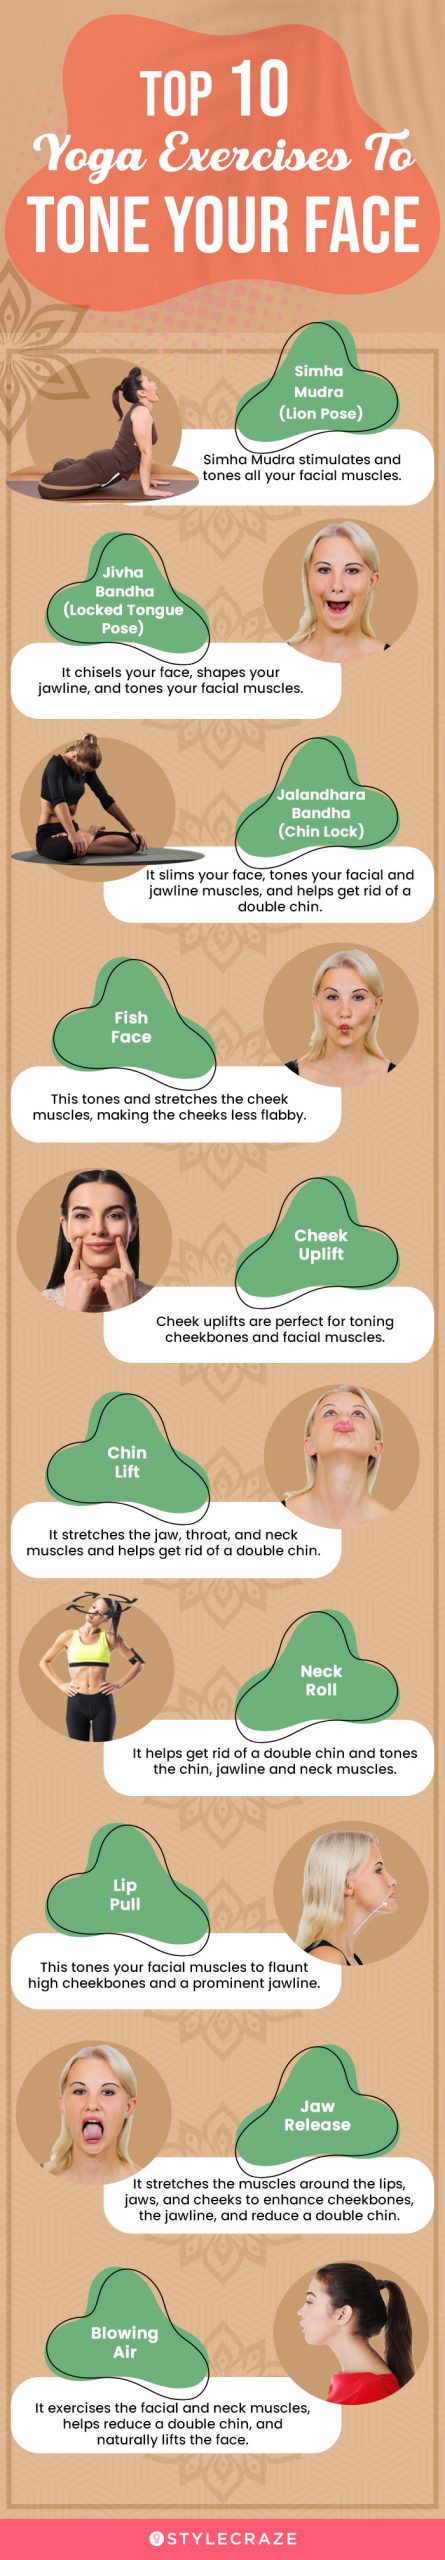 top 10 yoga exercises to tone your face (infographic)